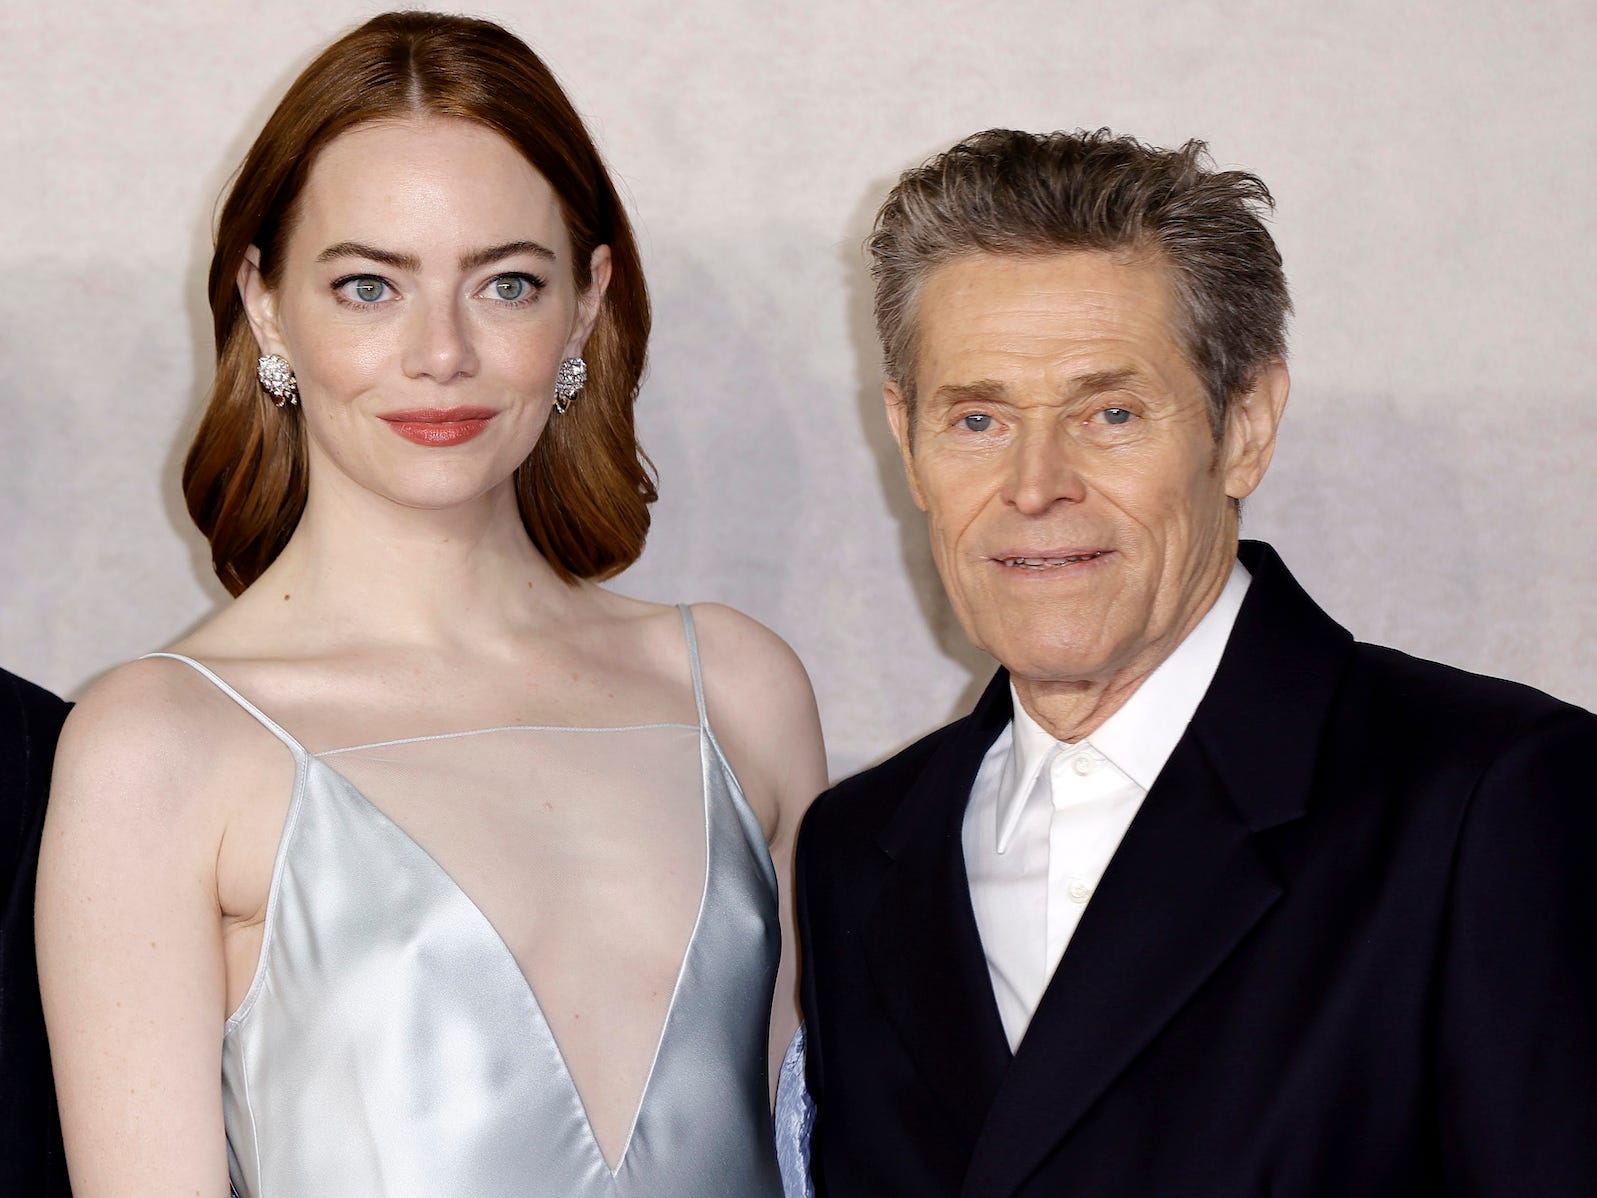 <p>The Searchlight Pictures anthology film will reunite director Yorgos Lanthimos with Emma Stone and Willem Dafoe after 2023's "Poor Things."</p><p>The synopsis is being kept under wraps, but the movie will also star Jesse Plemons, Margaret Qualley, and Joe Alwyn.</p>